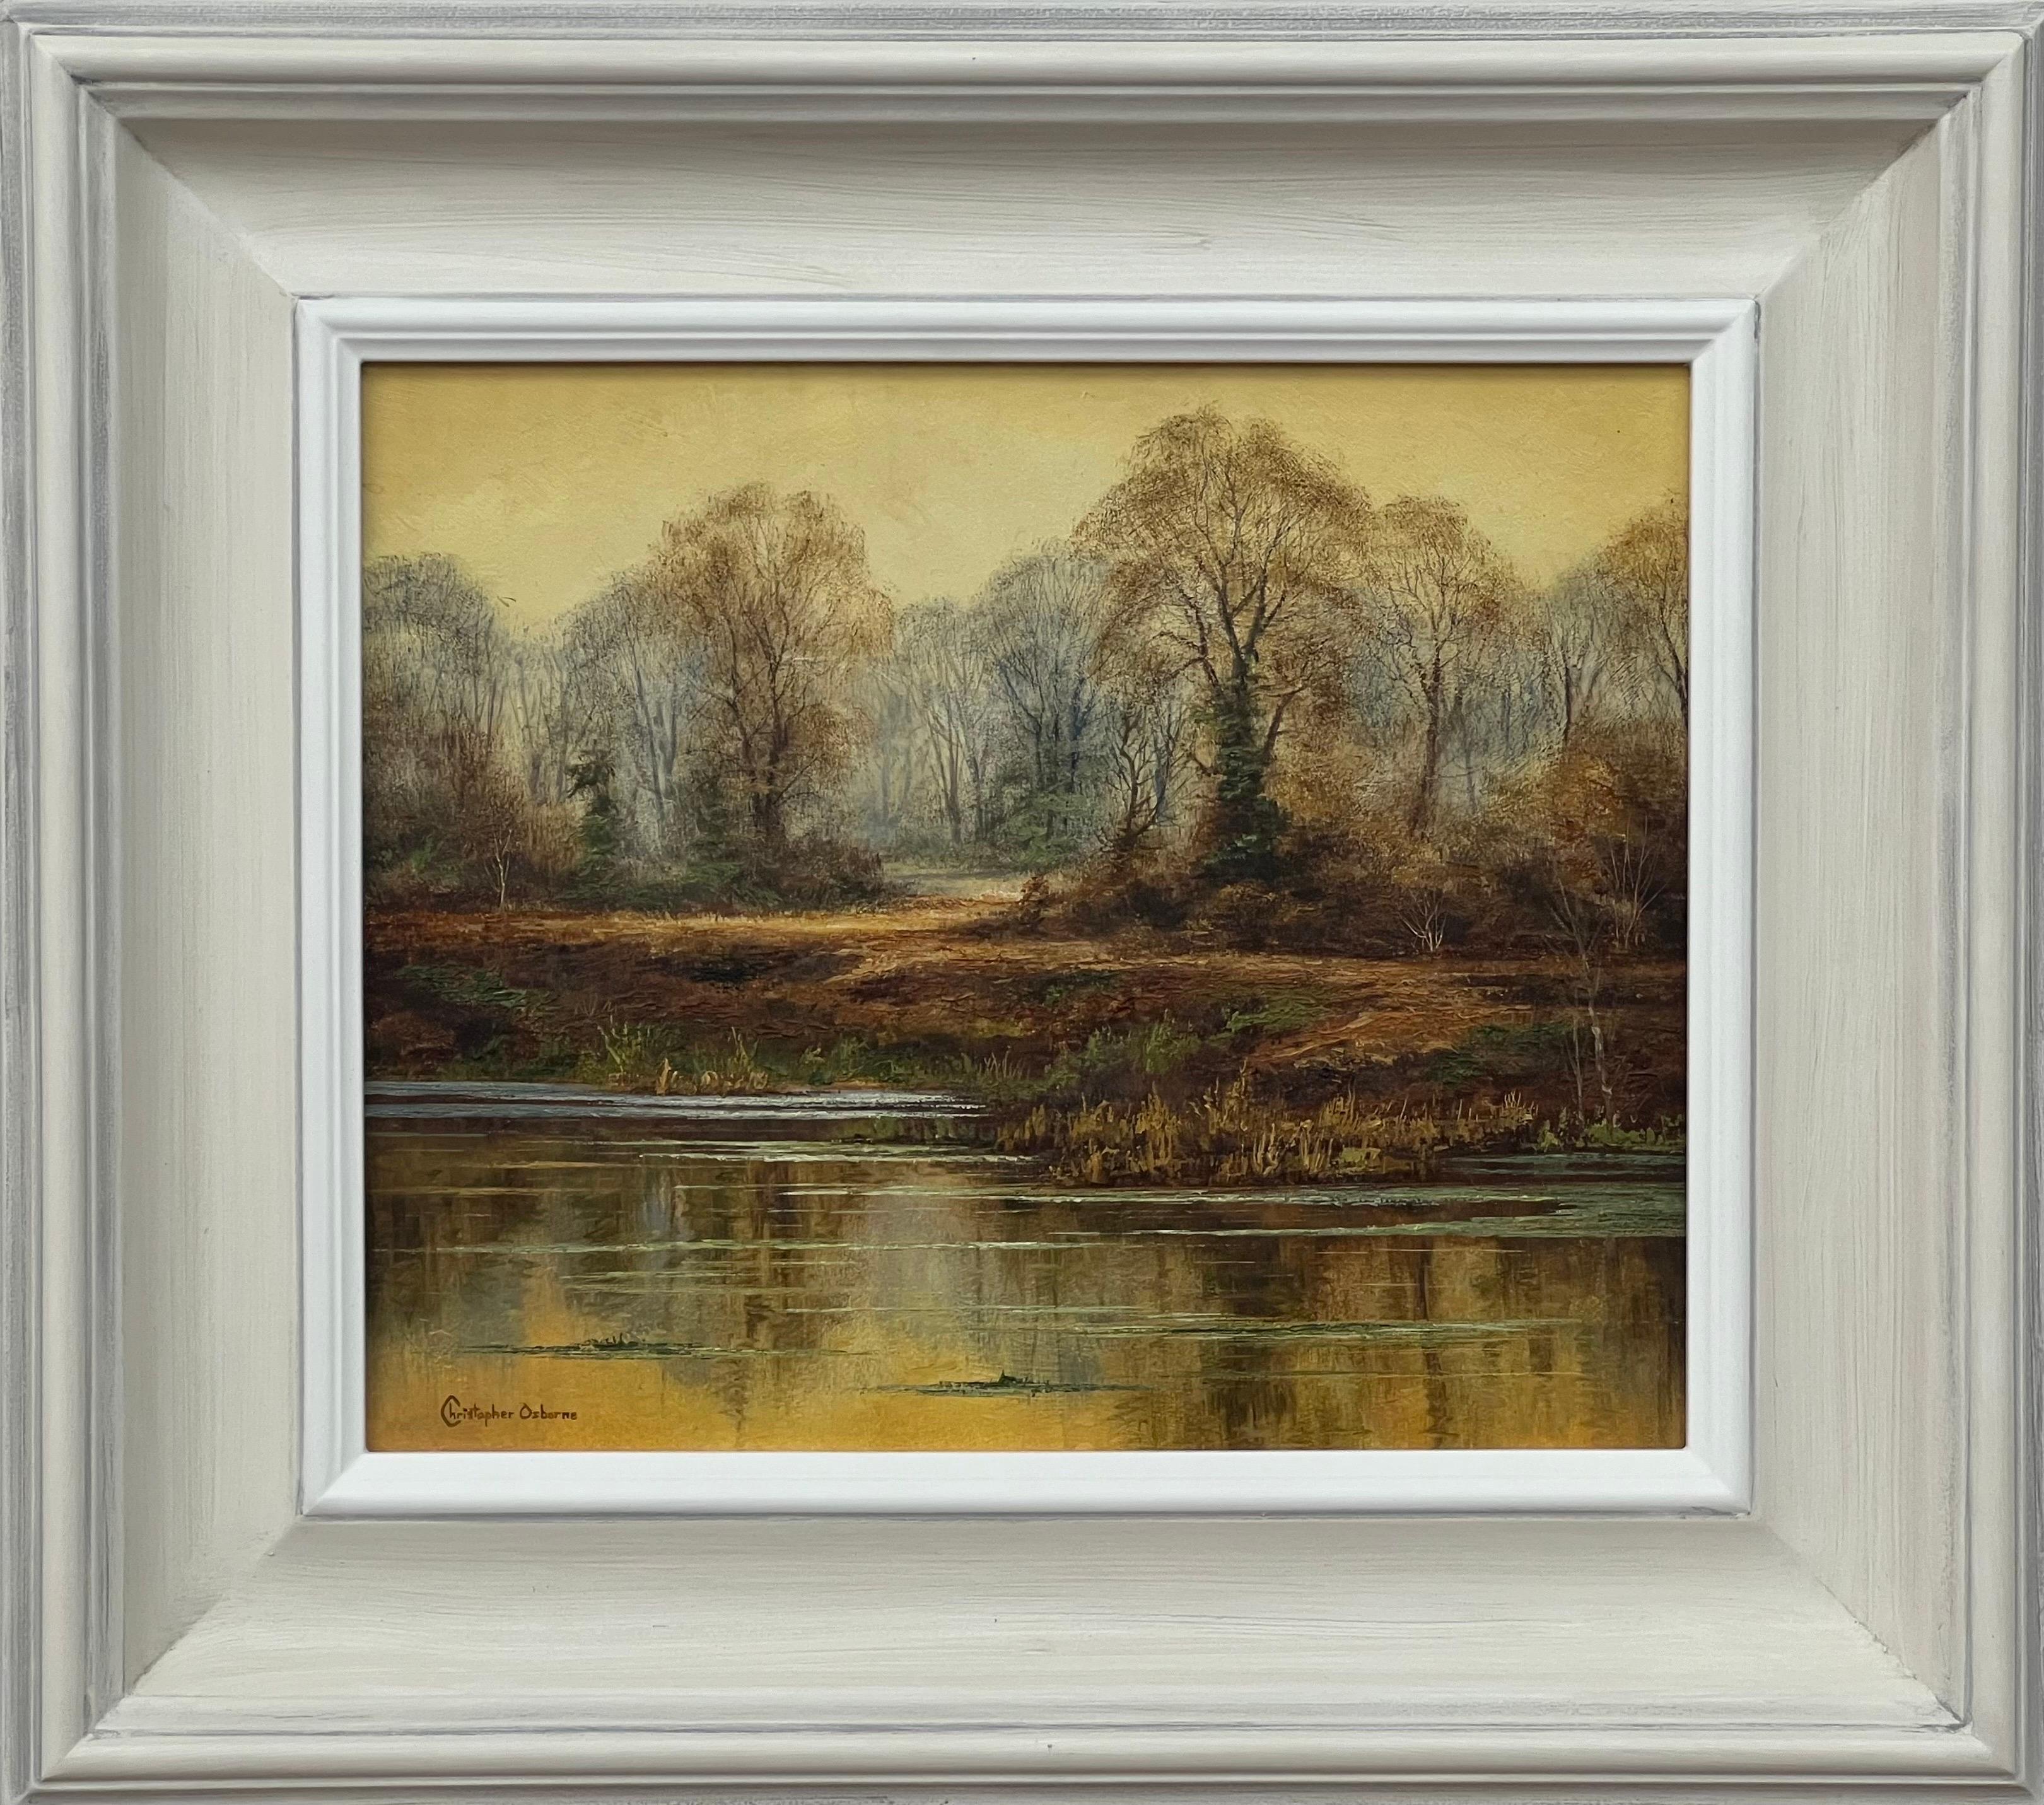 Reflections on Forest Pond in the English Countryside with Warm Yellows & Browns